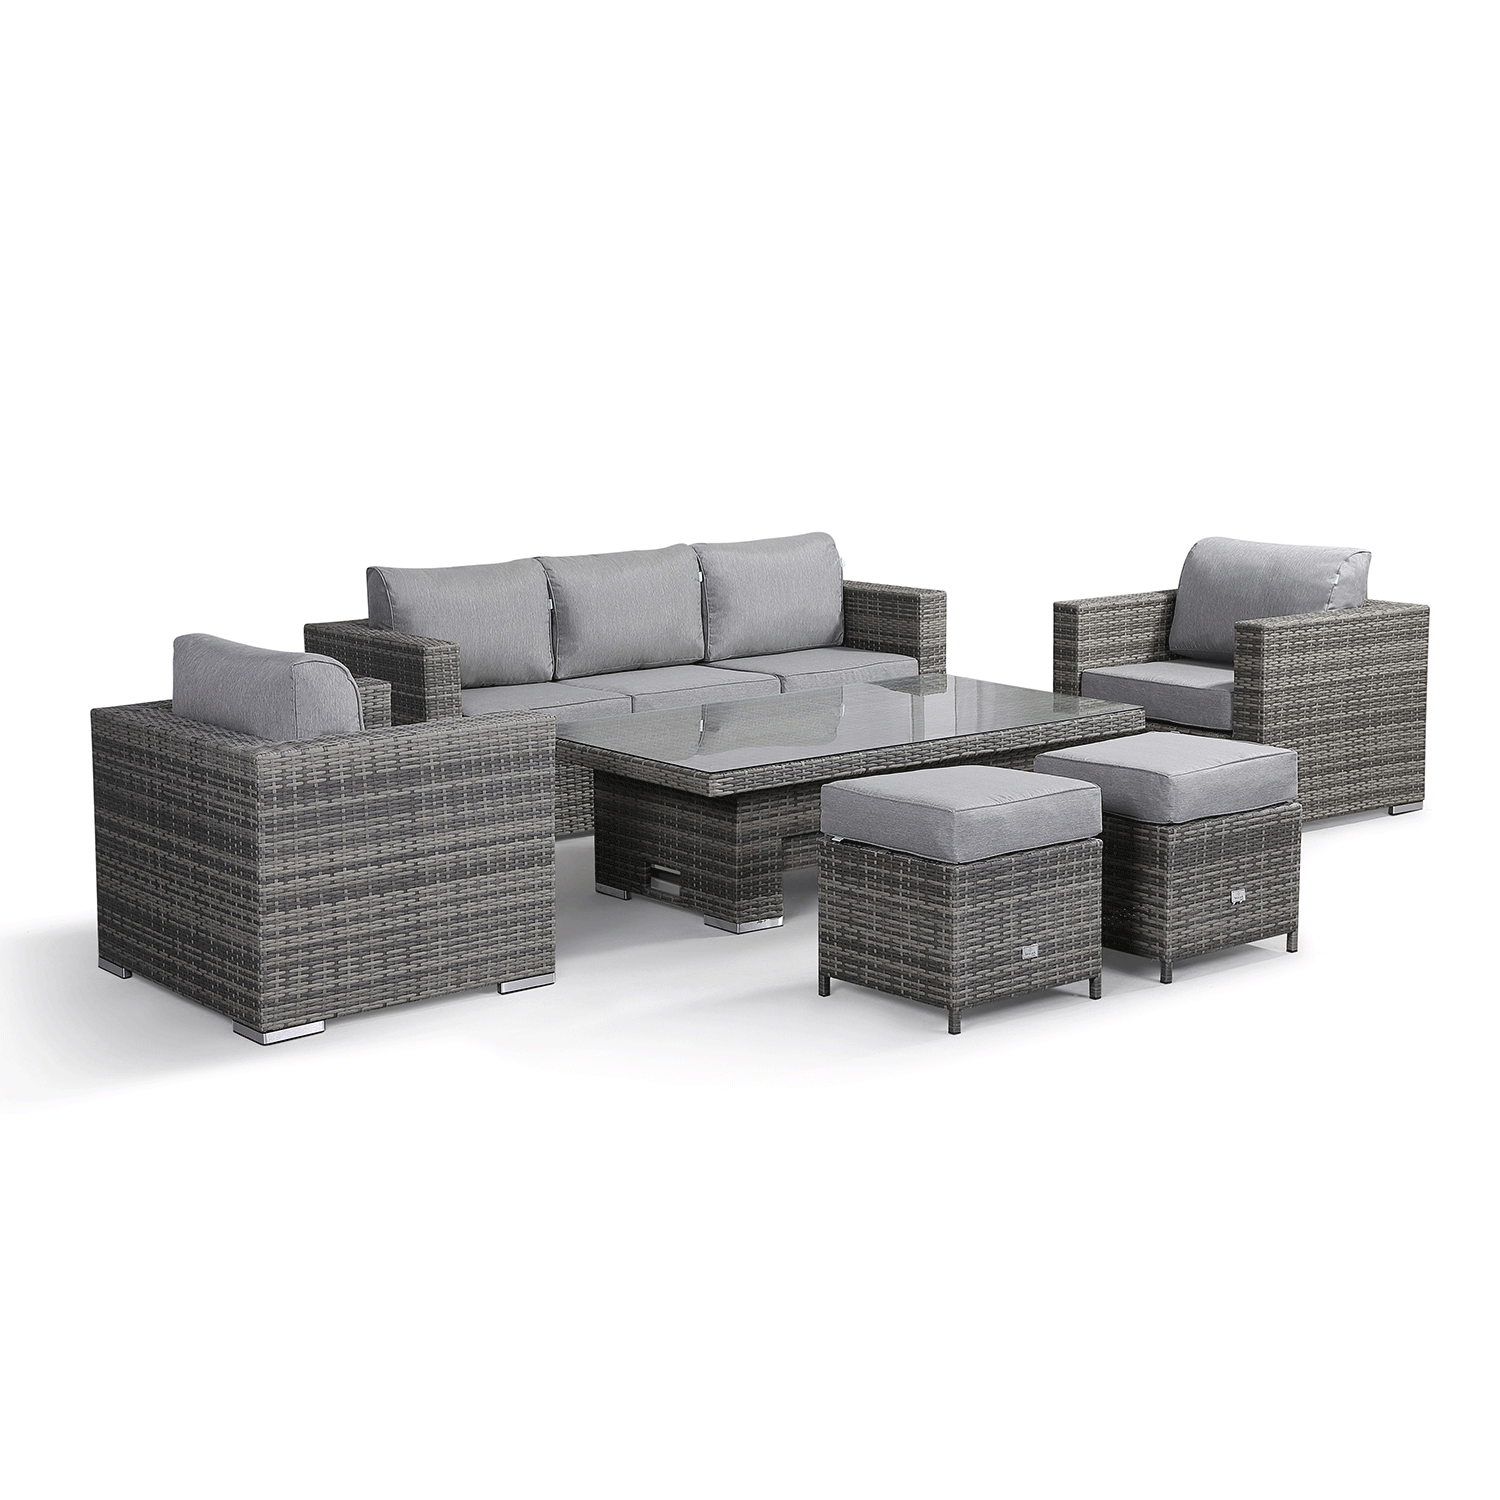 Rattan park Cambridge Range Large Sofa Set with Rising Table in Stone Grey Weave